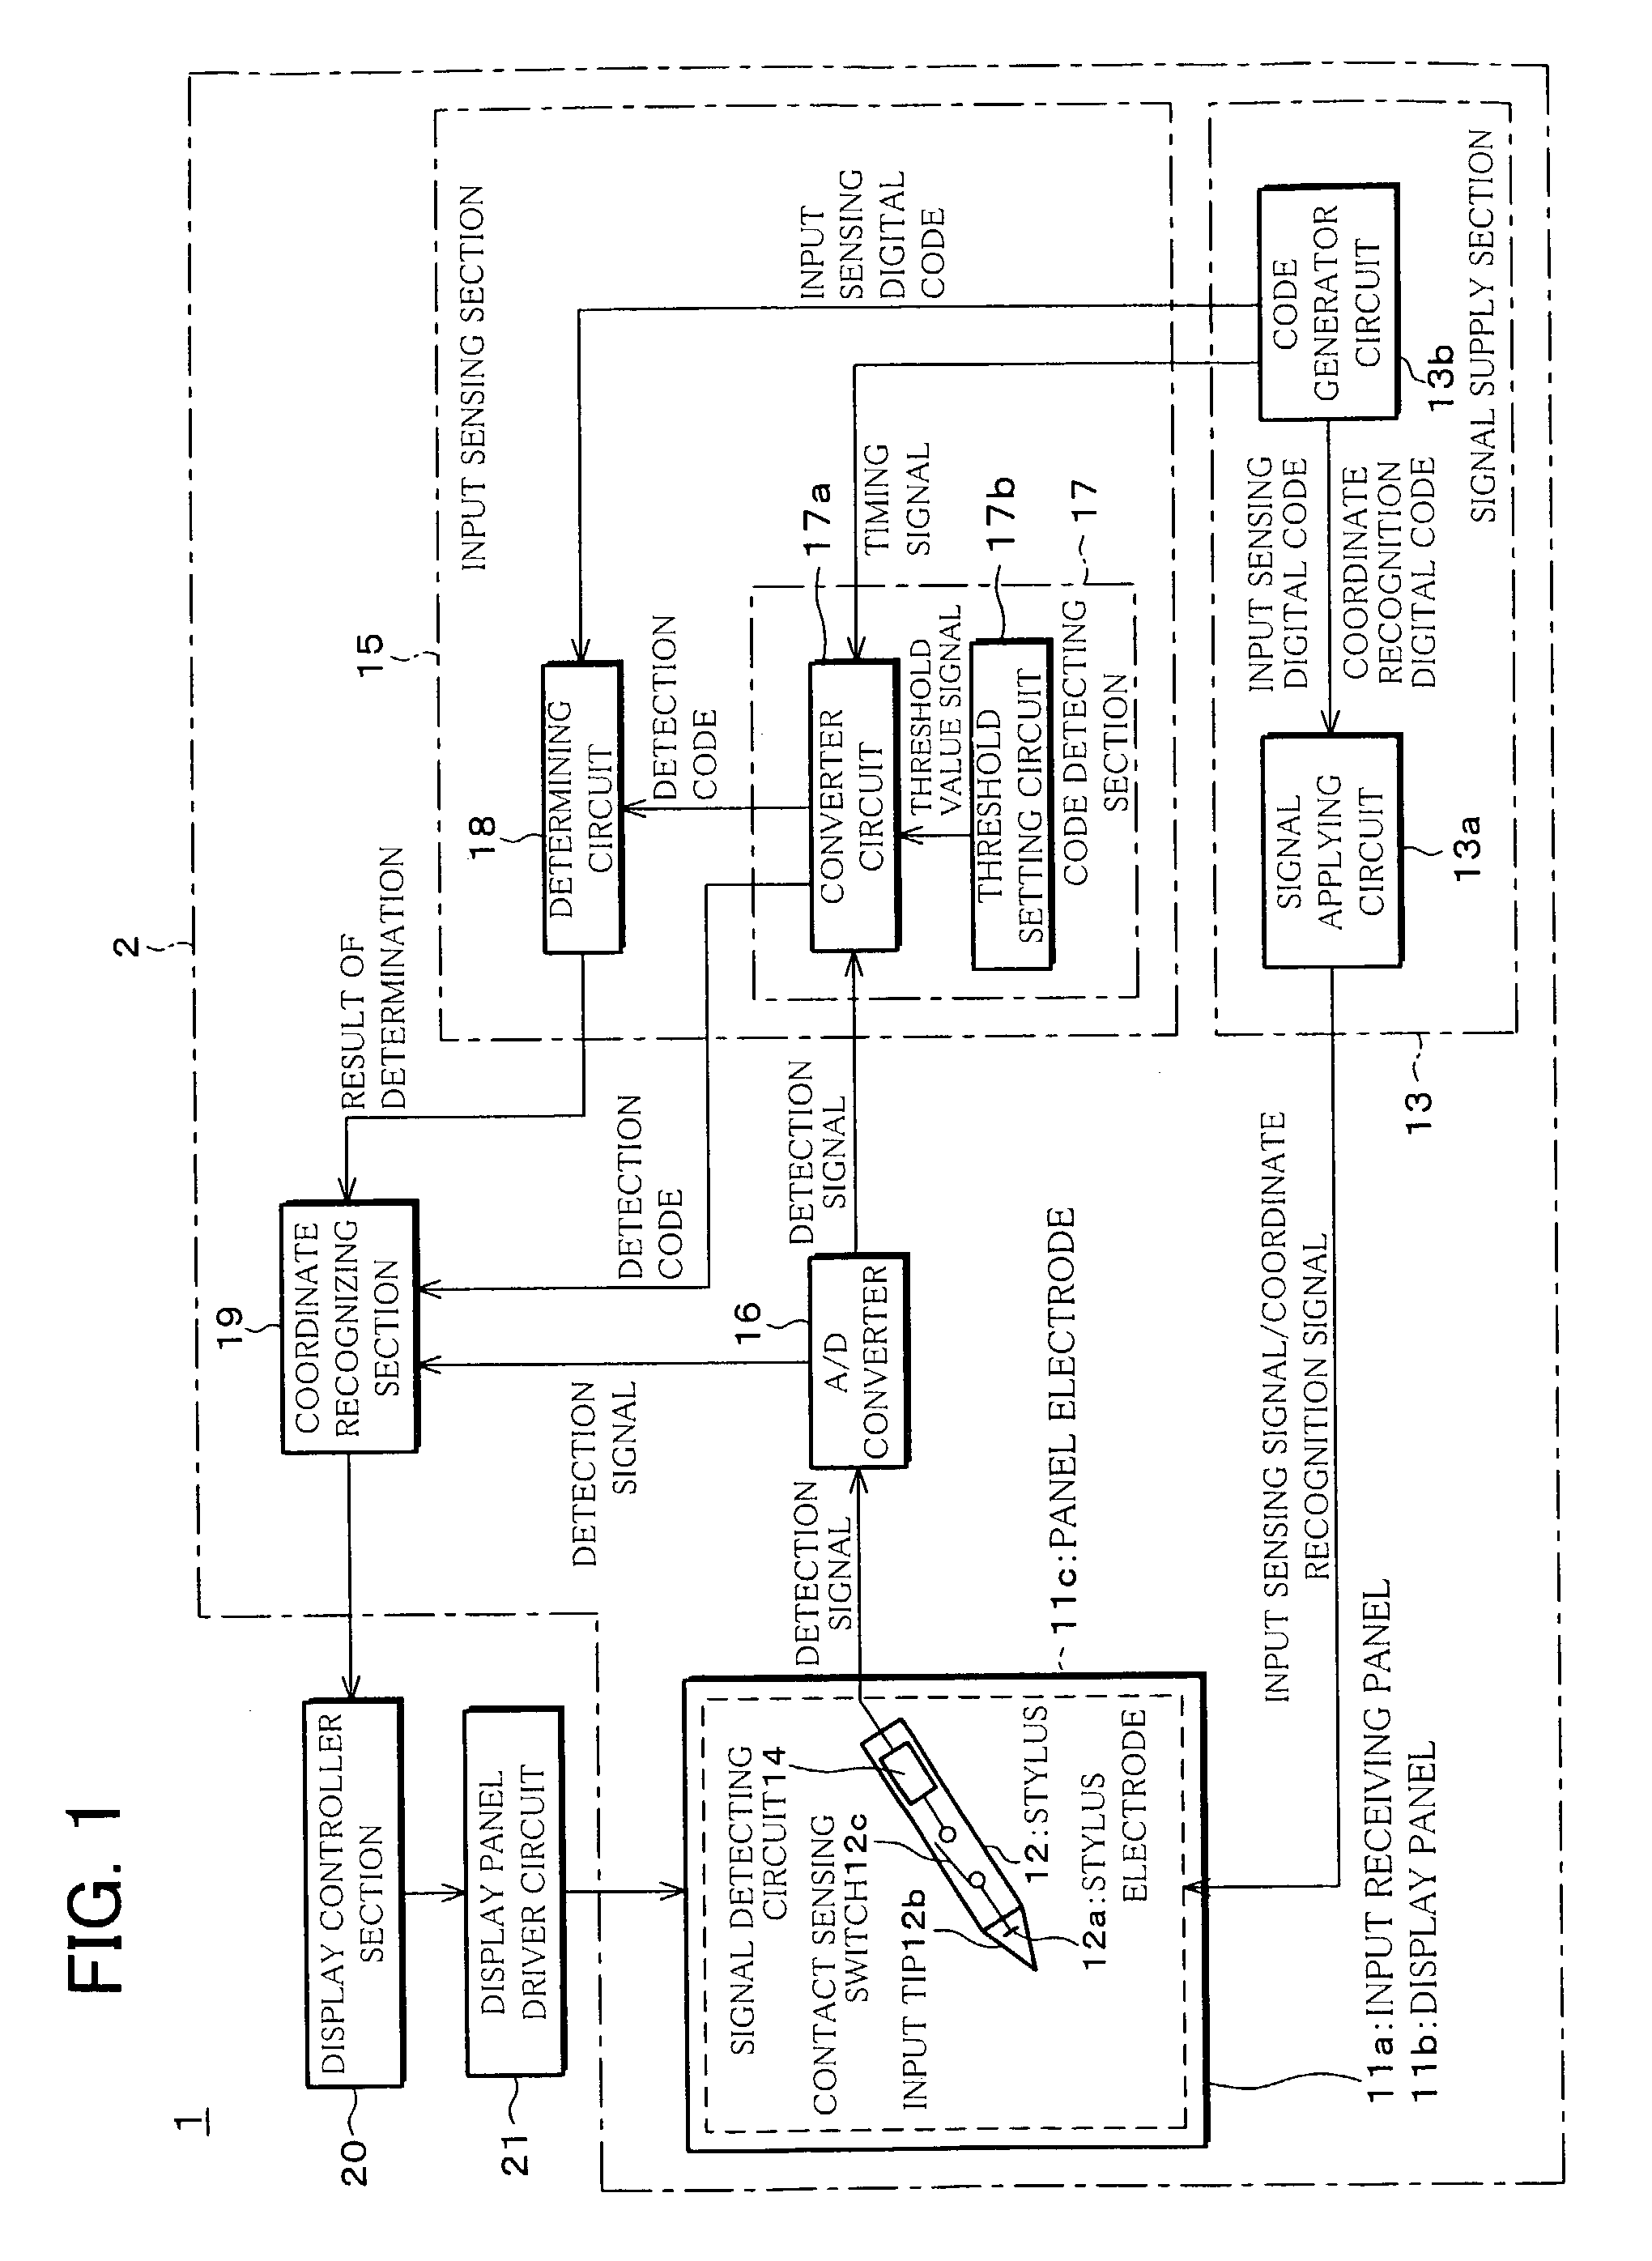 Input device and I/O-integrated display